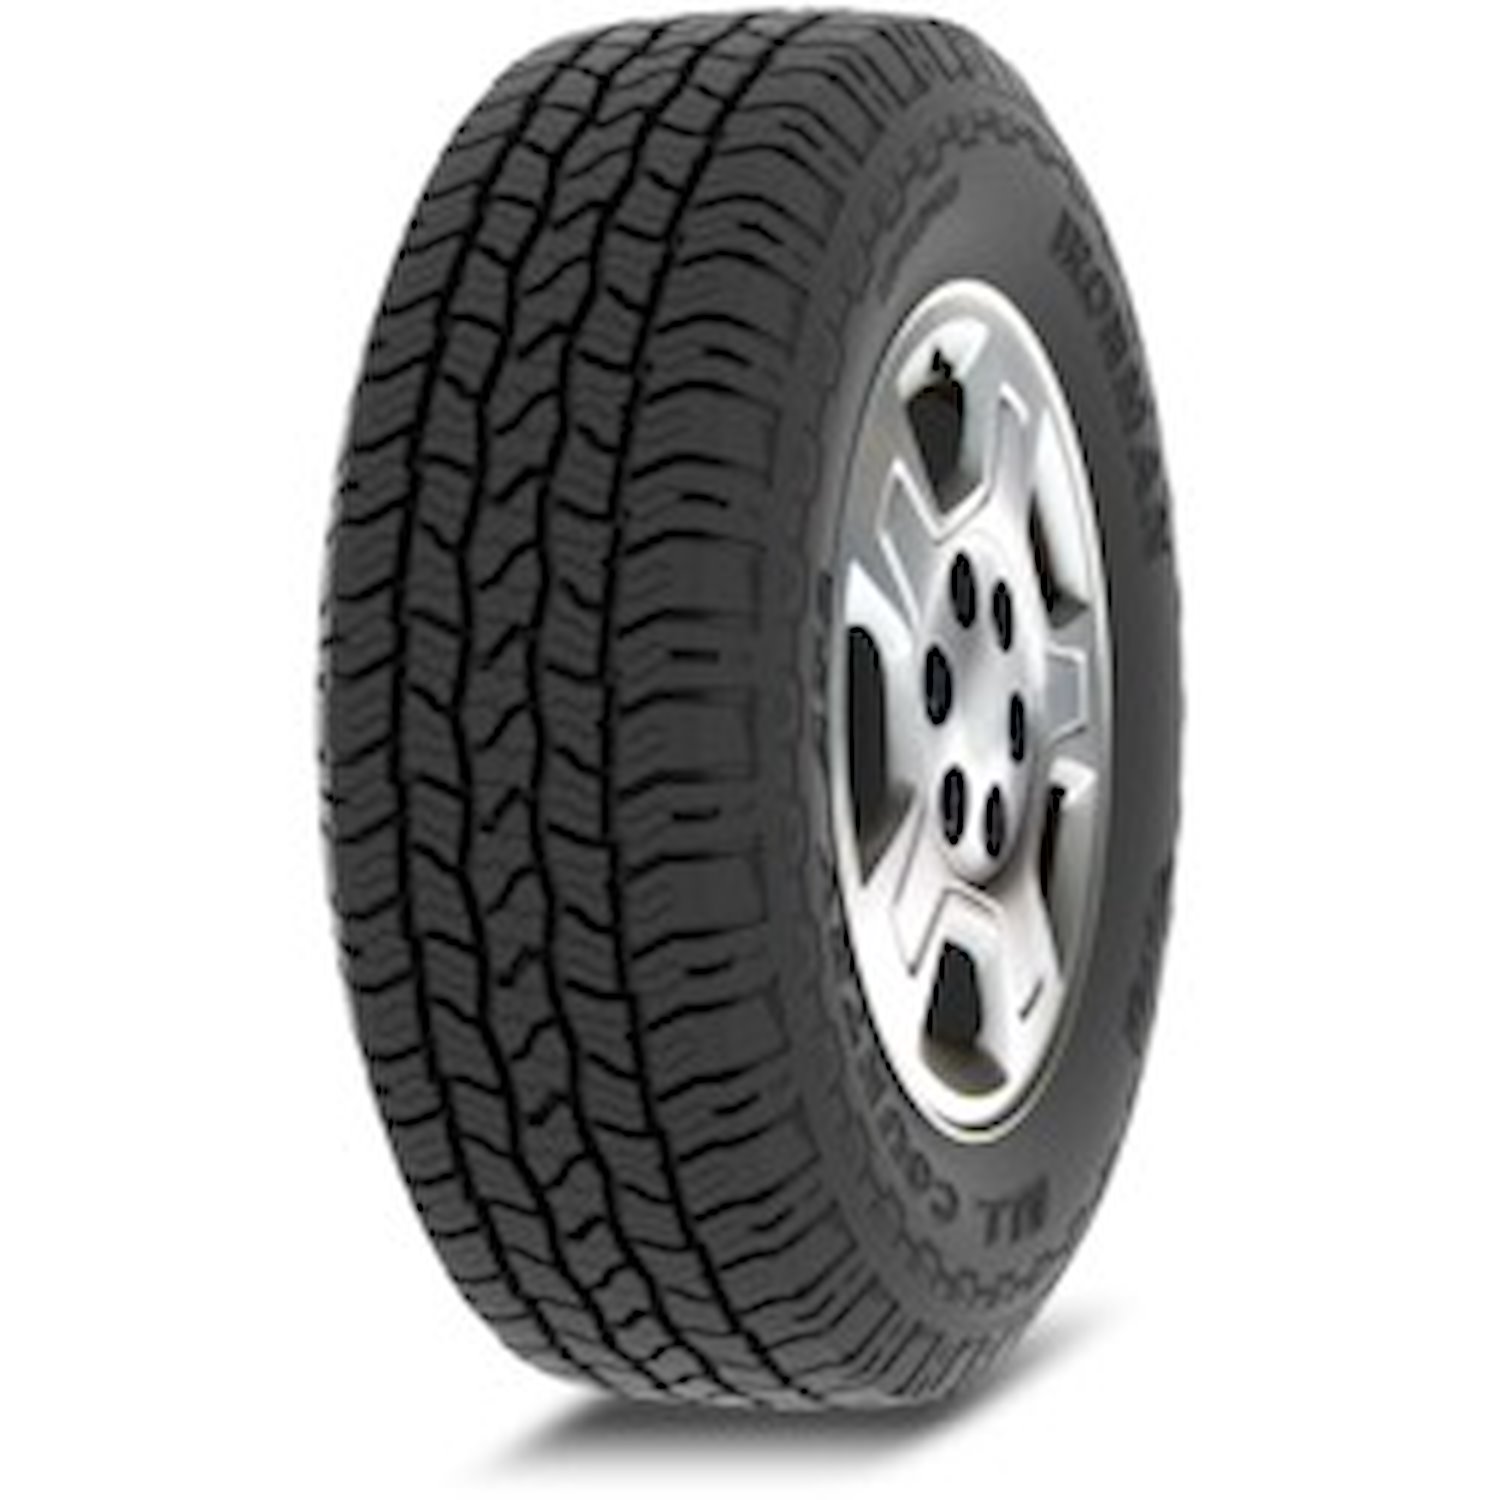 07666 All Country AT2 Tire, LT235/85R16, 120/116R